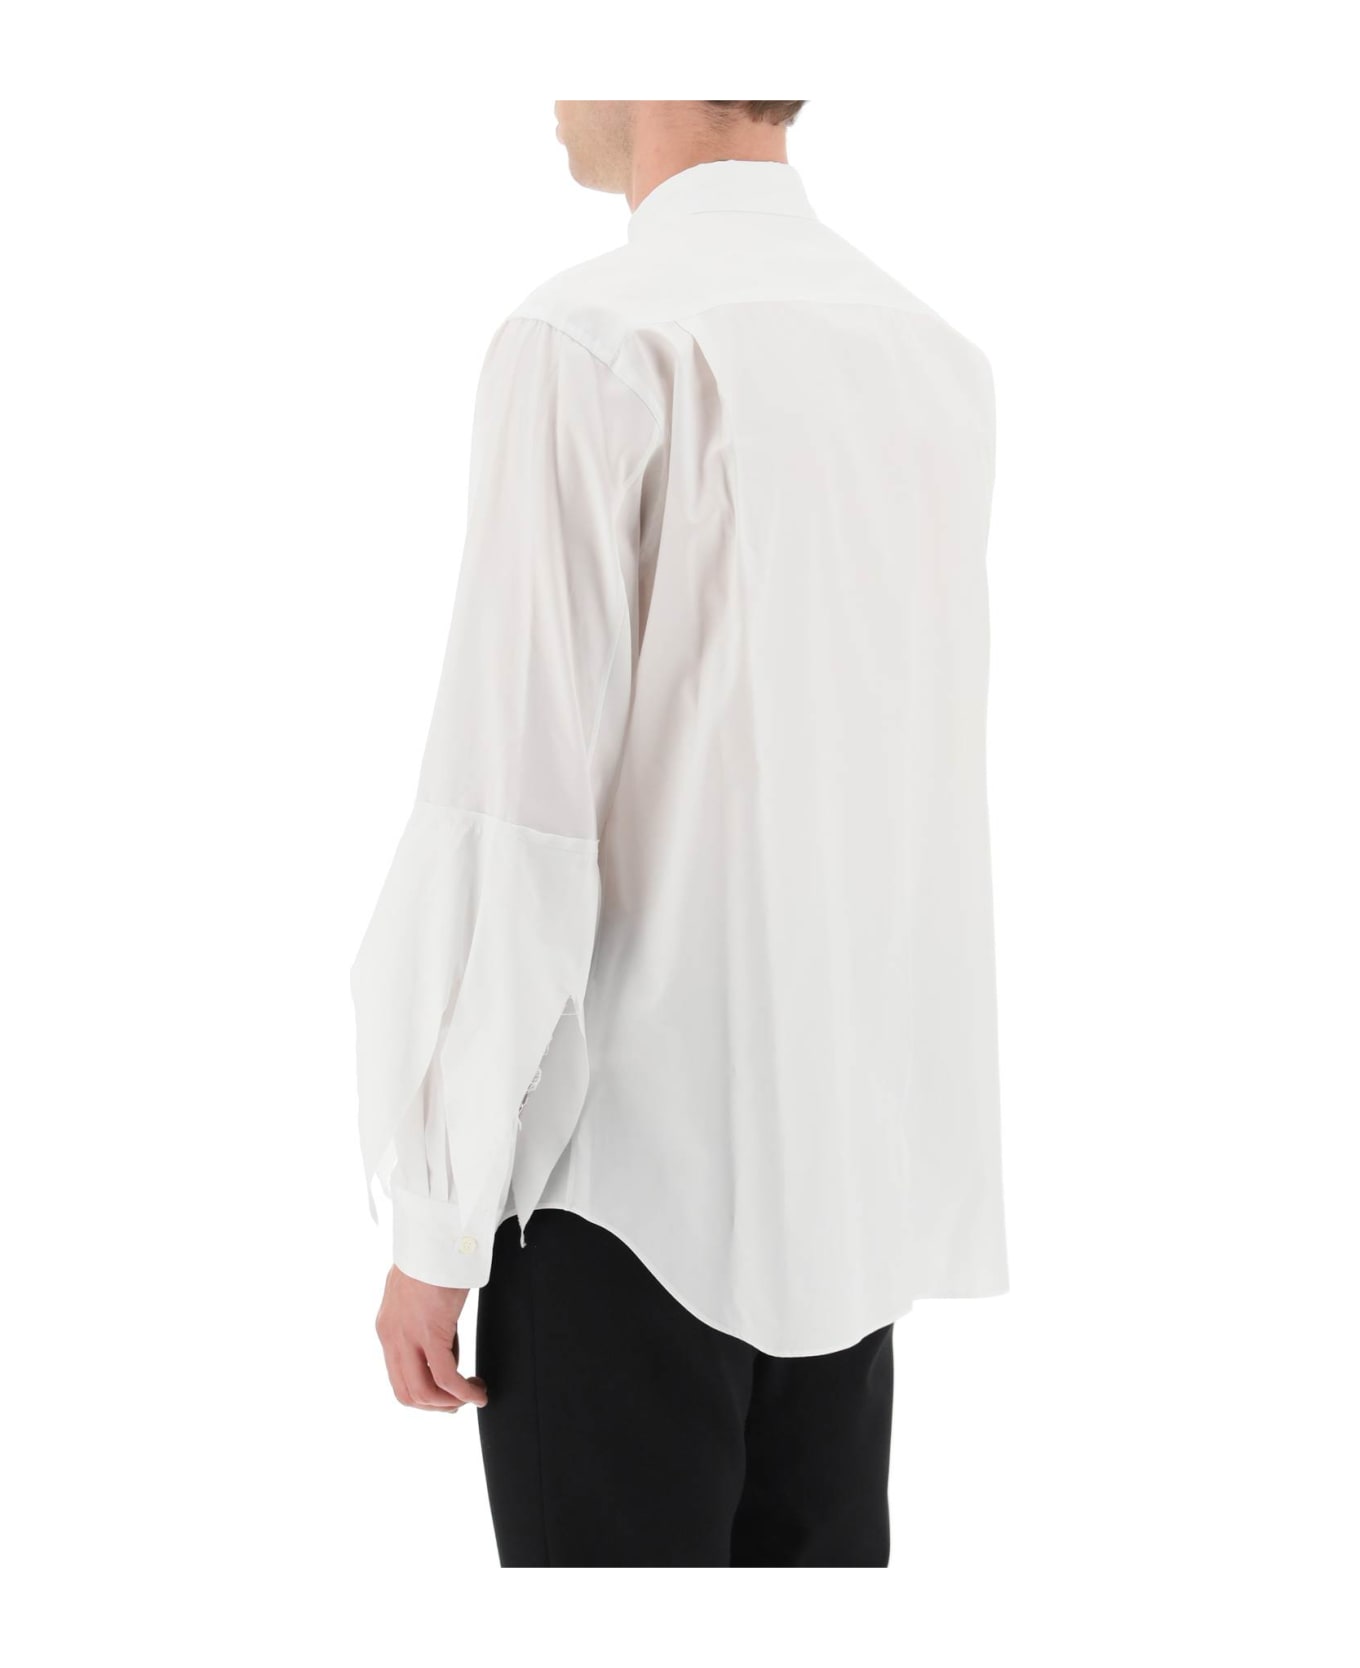 Comme Des Garçons Homme Plus Spiked Frayed-sleeved Shirt - WHITE (White)